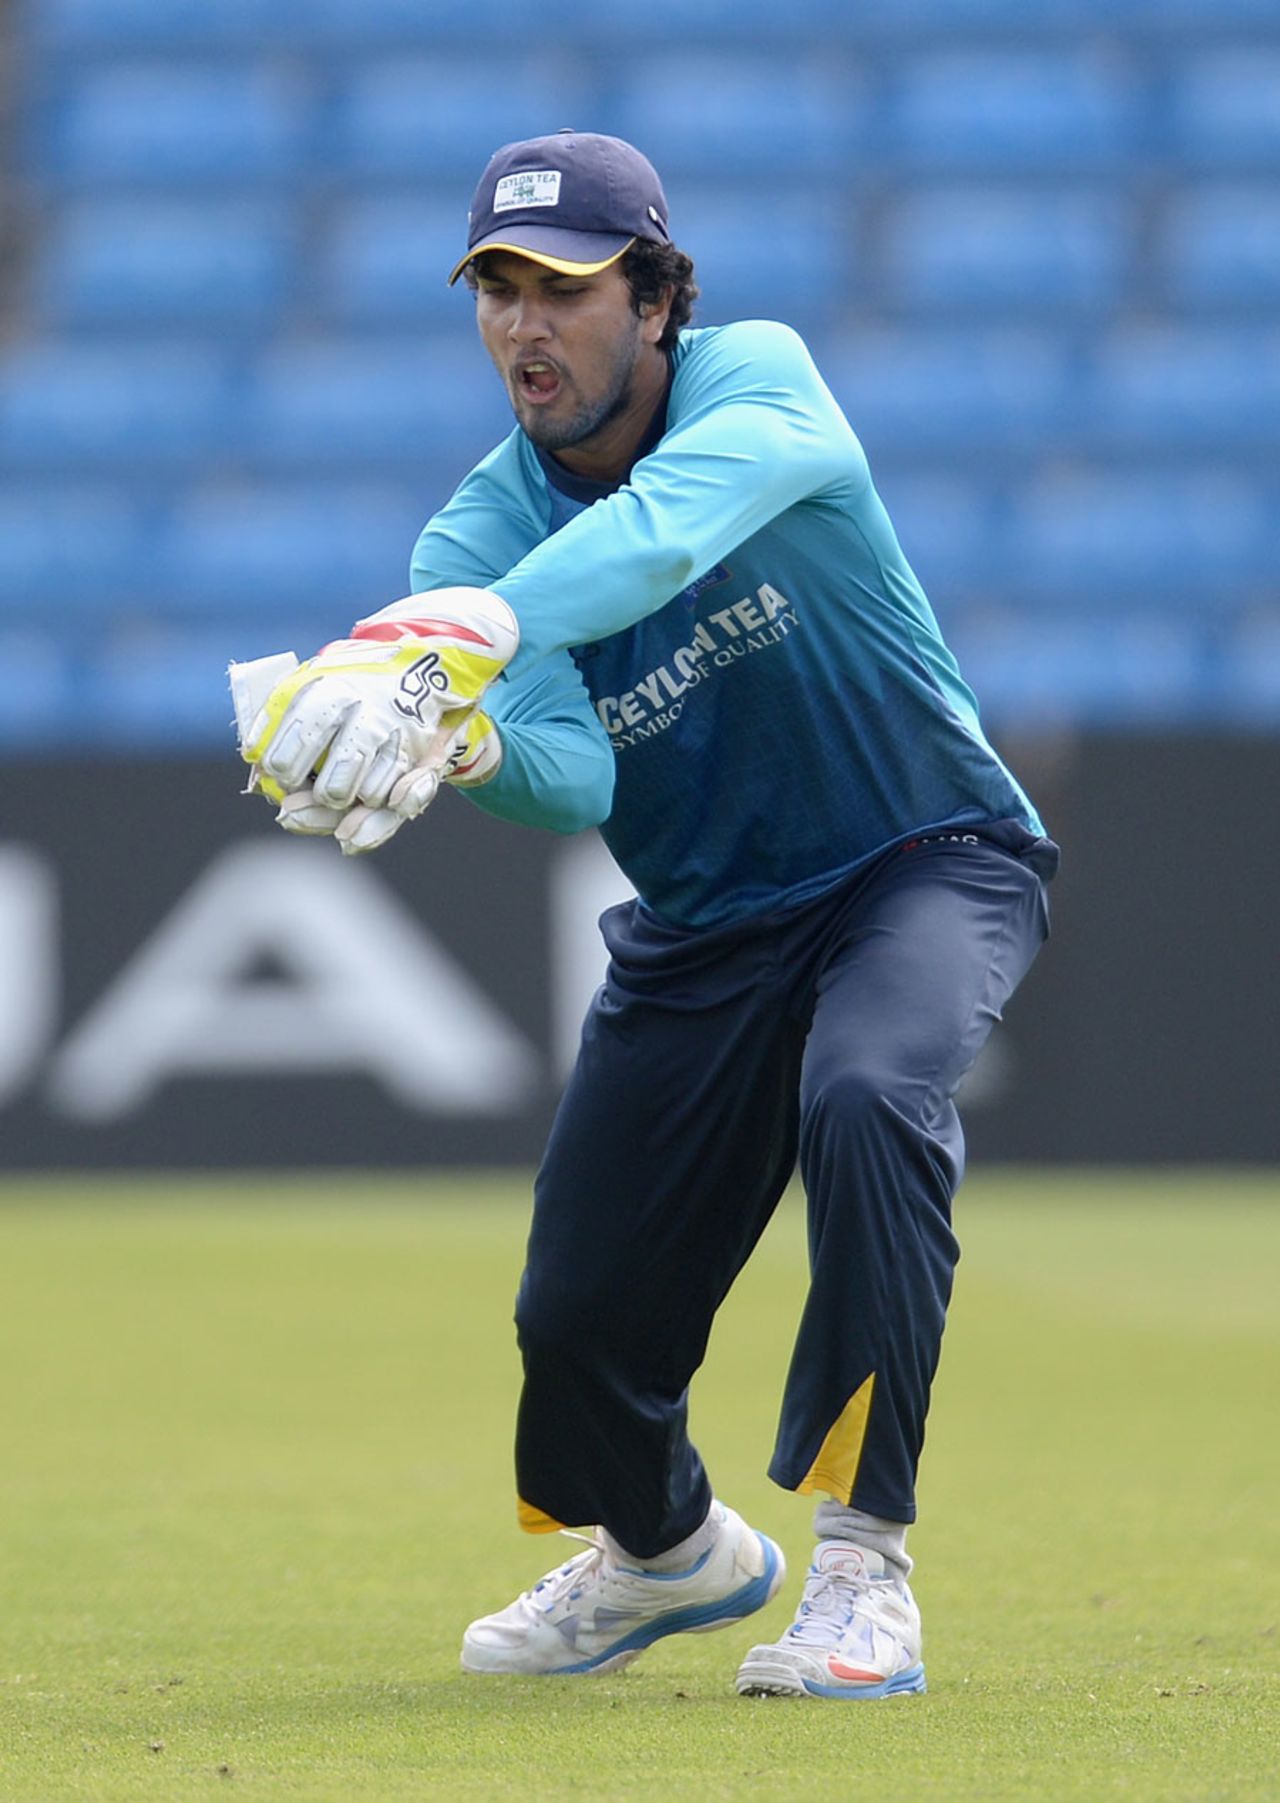 Dinesh Chandimal is expected to come in as Sri Lanka's wicketkeeper, Headingley, June 18, 2014